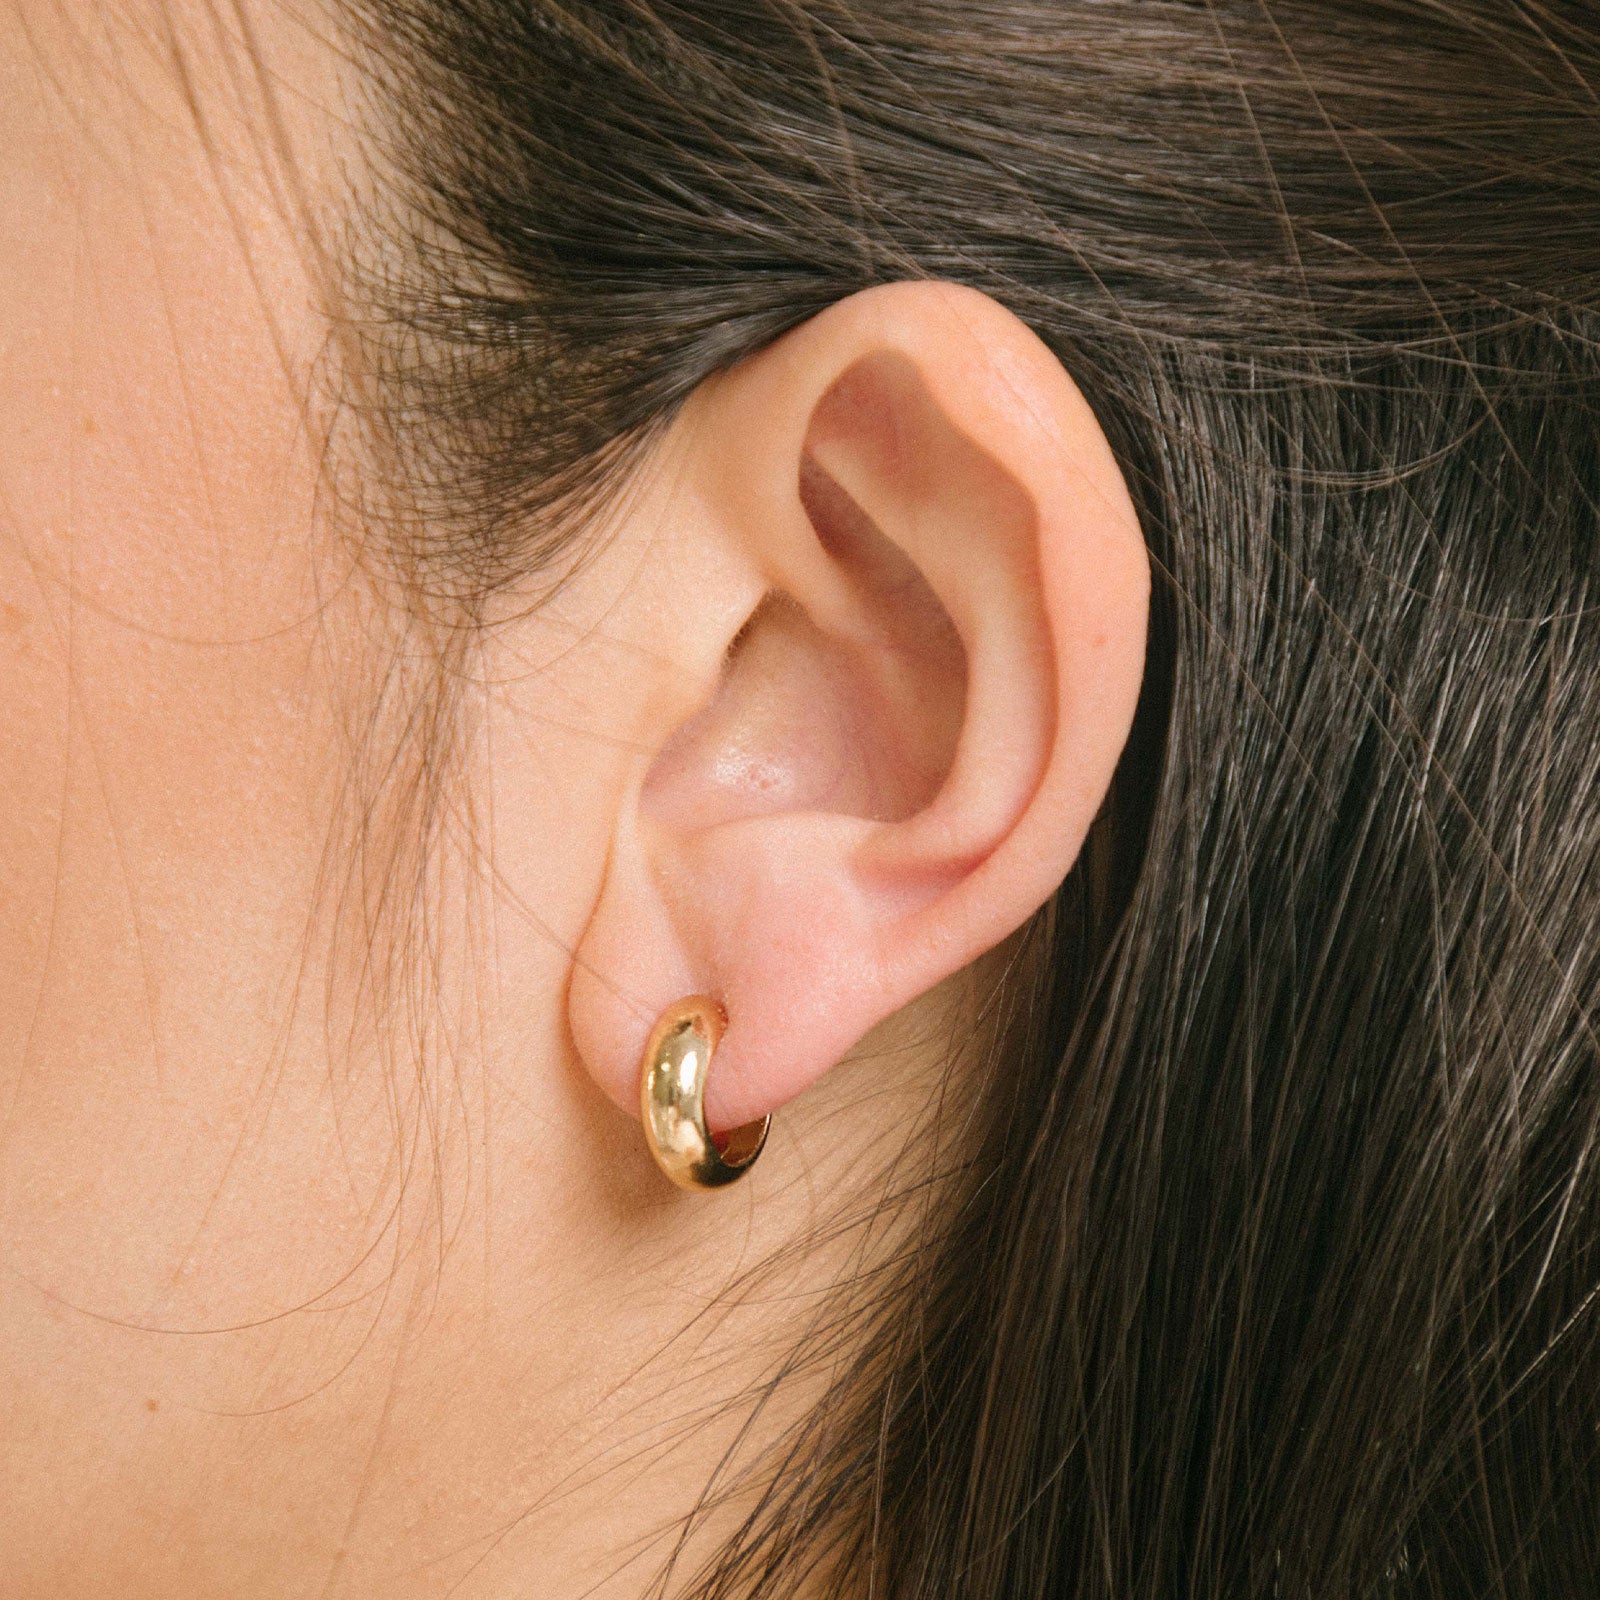 A model wearing the Everyday Essentials Set comes with three pairs of earrings featuring an Invisible Resin, Sliding Spring and Mosquito Coil closure. The set includes a Simple Gold Huggie Clip-On, Mini Hoop Earrings, and Gold Cassie Hoop Earrings, all crafted of Gold tone plated alloy, Stainless steel, or Gold Tone Metal Alloy. It is also available in Silver.